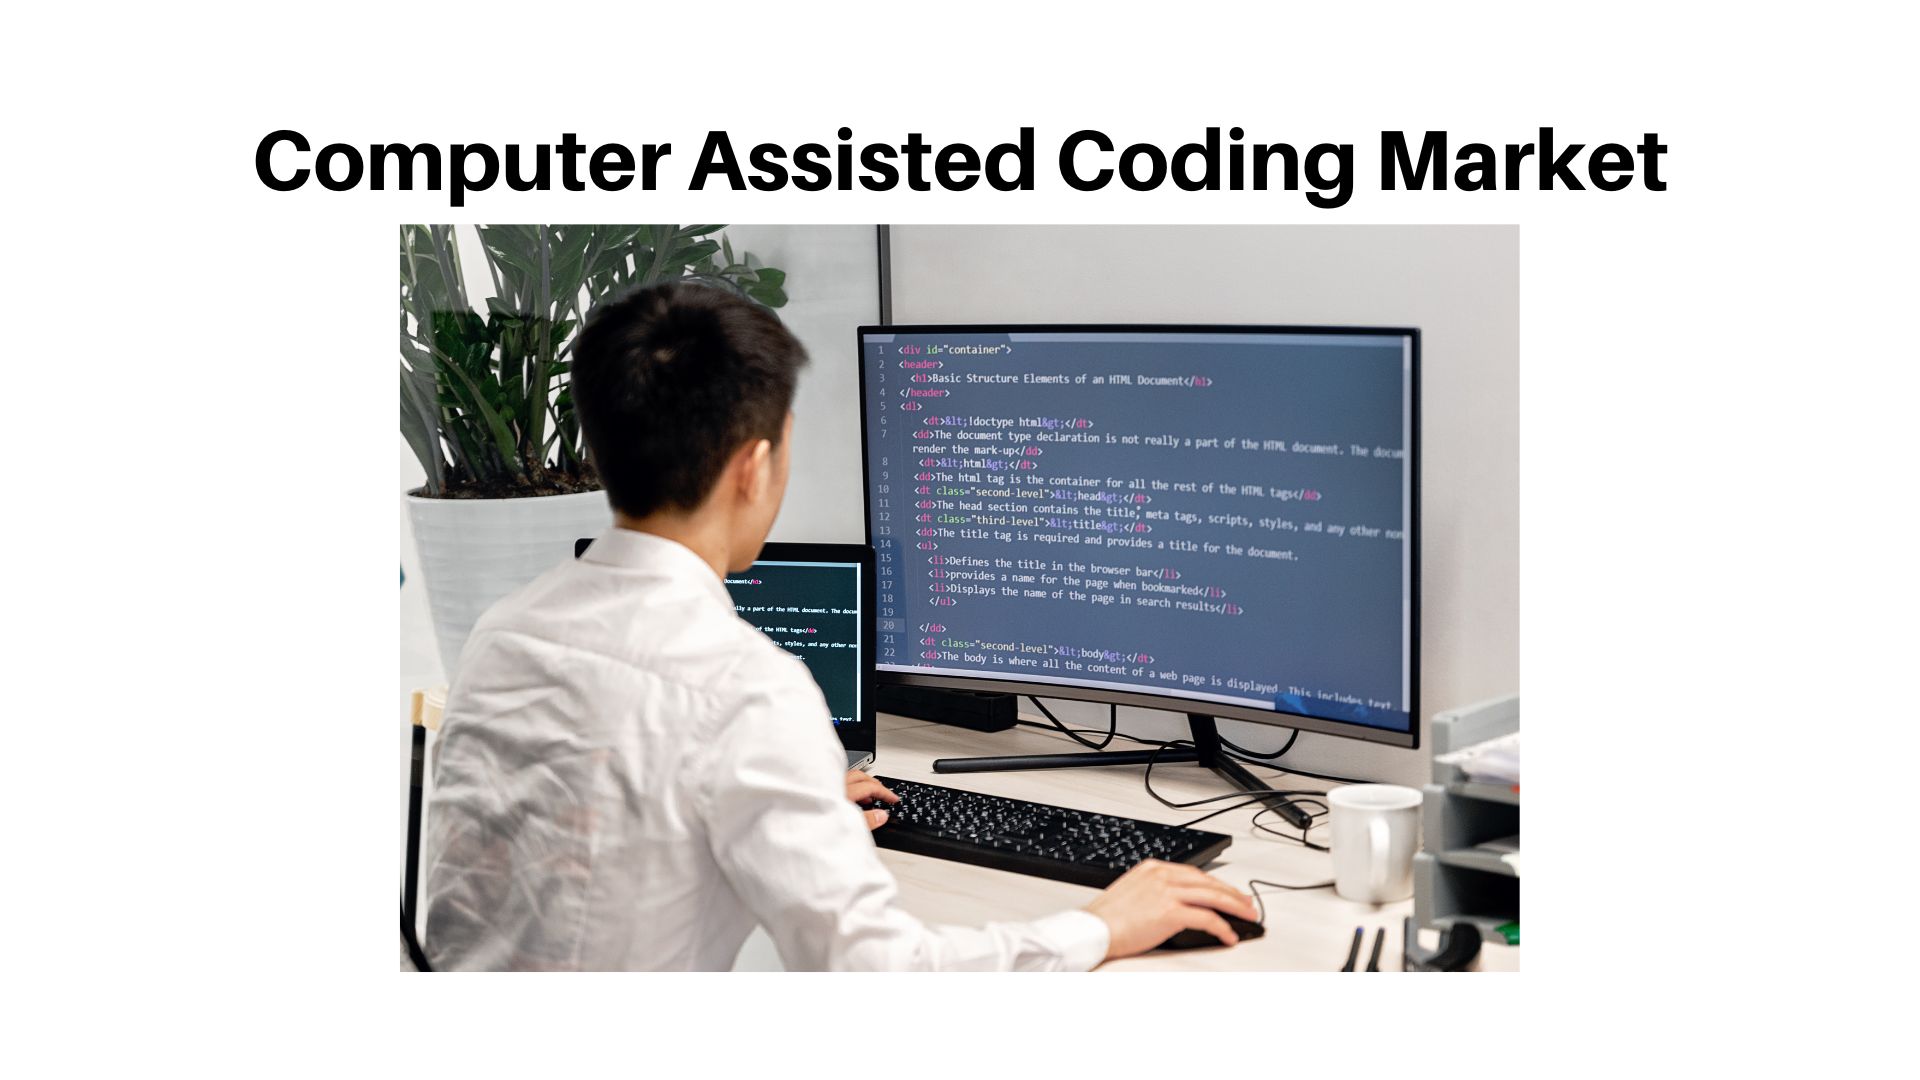 Computer Assisted Coding Market Set to Grow at a CAGR of 11.5% from 2023 to 2033